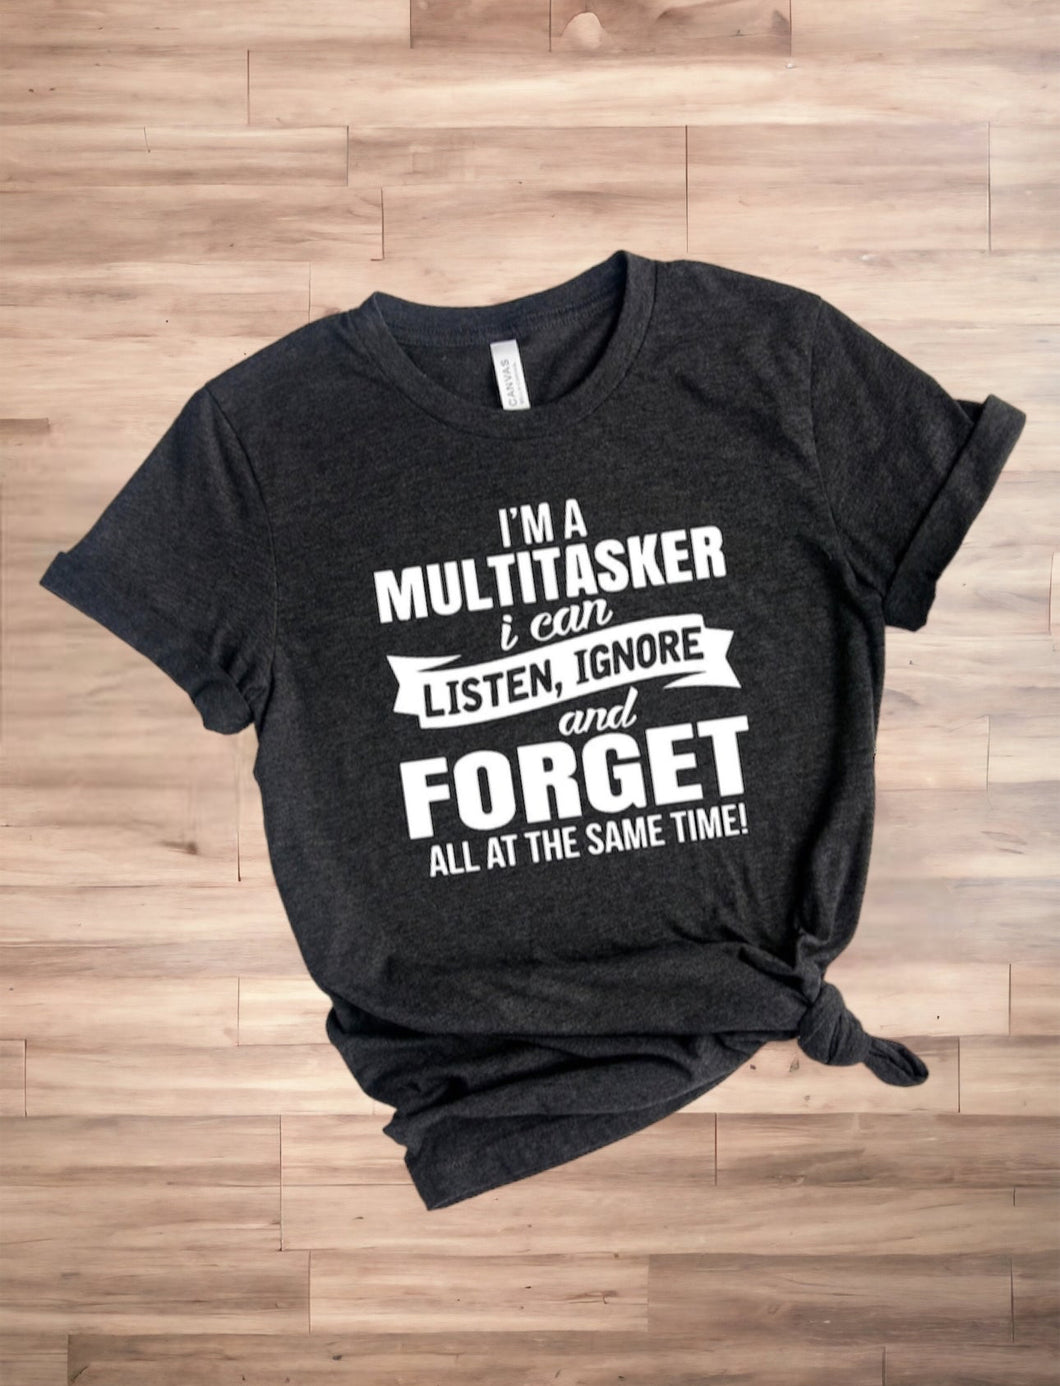 I'm A Multitasker I Can Listen Ignore And Forget All At The Same Time Shirt, Sarcastic Shirt, Sarcasm Shirt, Attitude Shirt, Dark Humor Tee